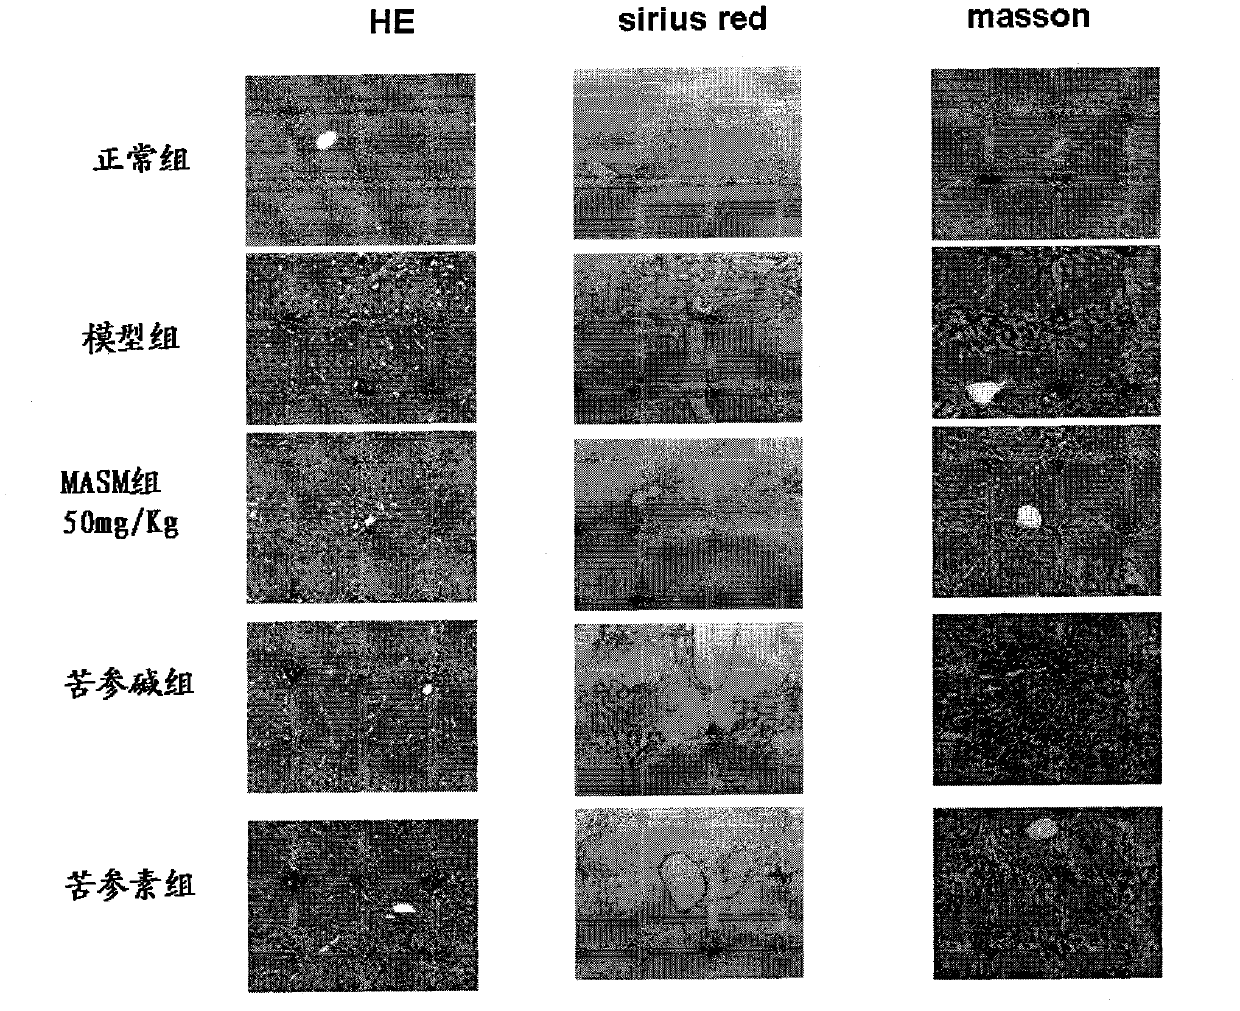 Application of 13-methylamino-18-thiomatrine compound in the preparation of anti-hepatic fibrosis or other tissue and organ fibrosis drugs